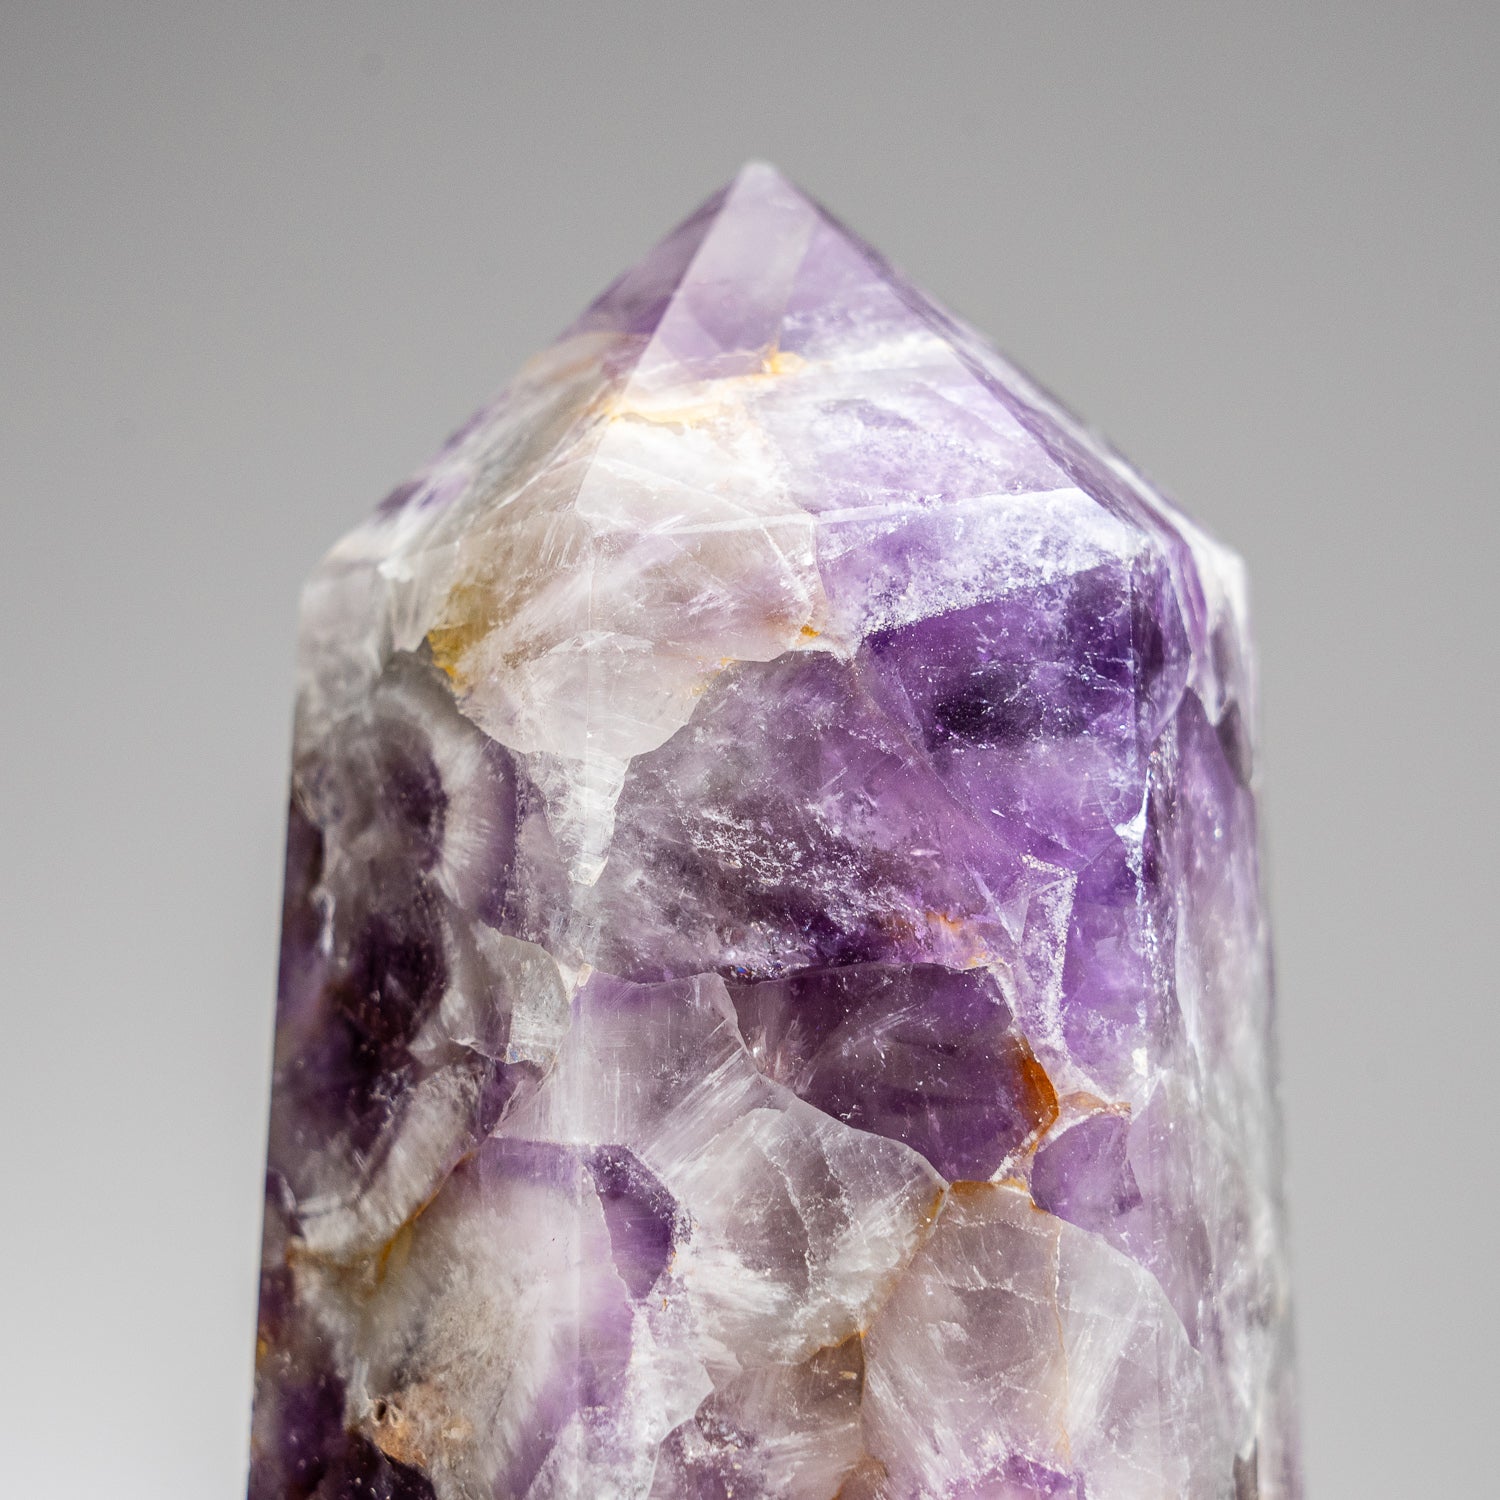 Polished Amethyst Crystal Point From Brazil (3 lbs)